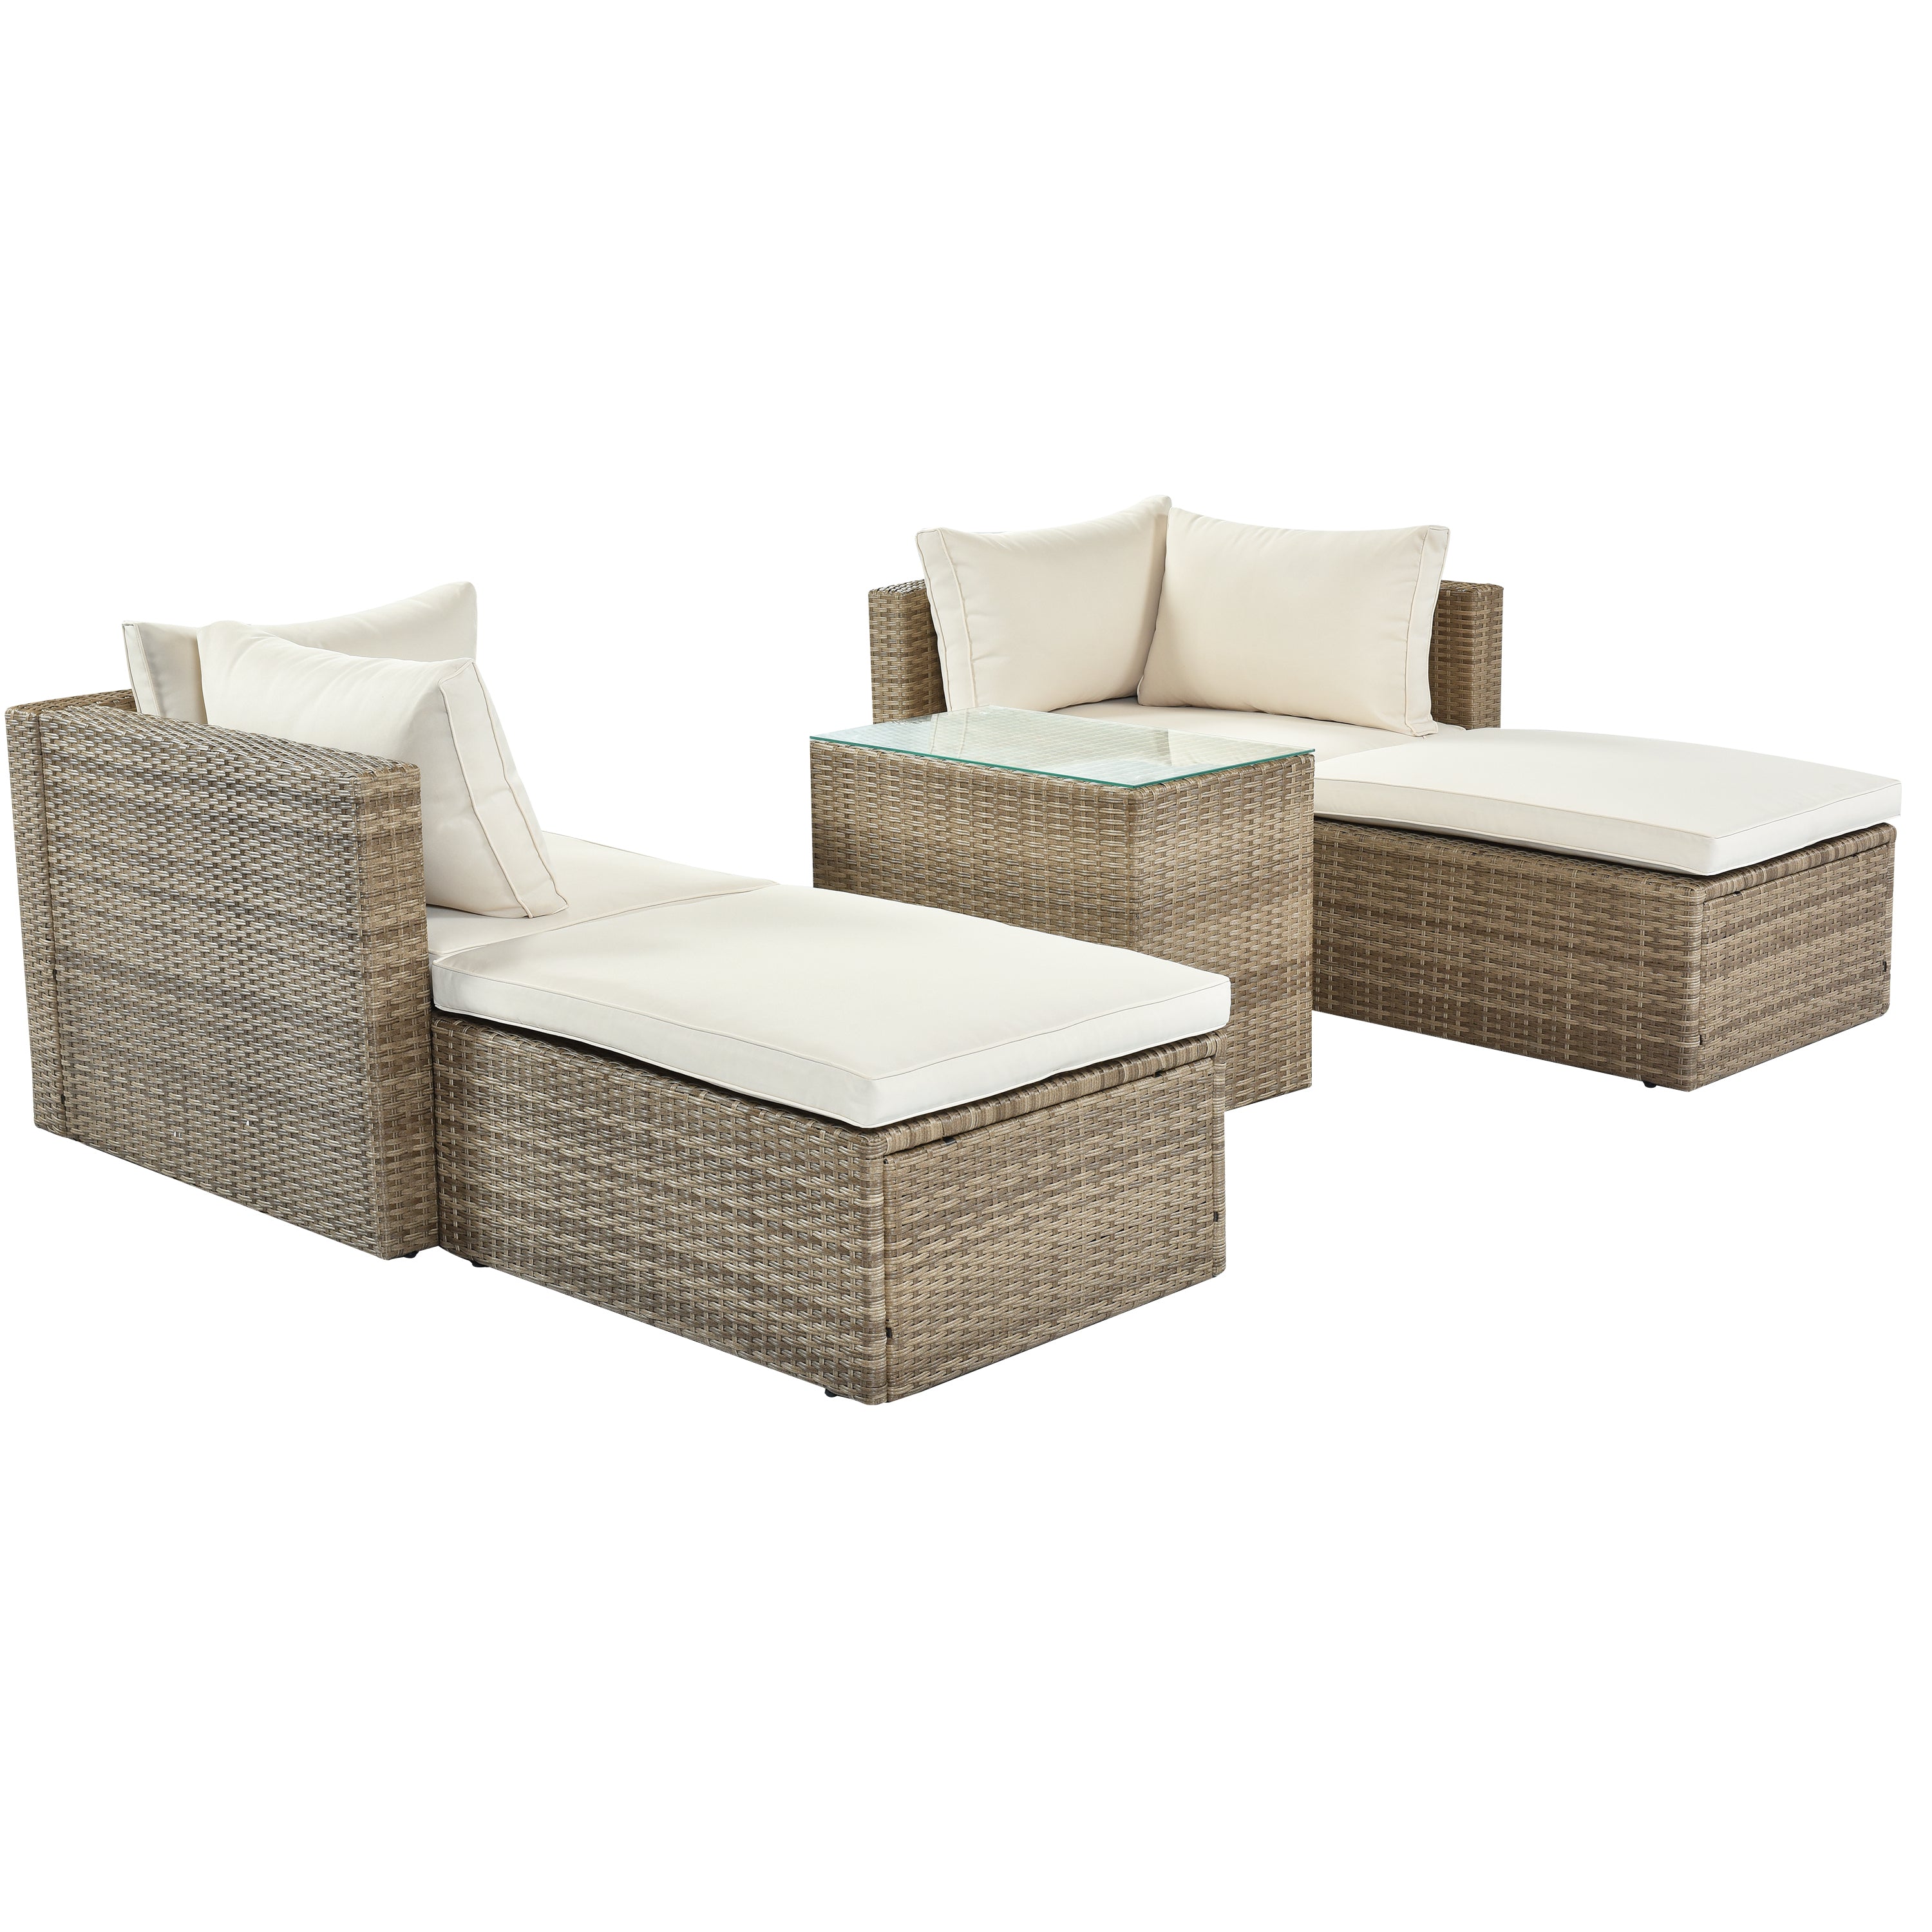 Outdoor Patio Furniture Set, 5-Piece Wicker Rattan Sectional Sofa Set - Brown and Beige